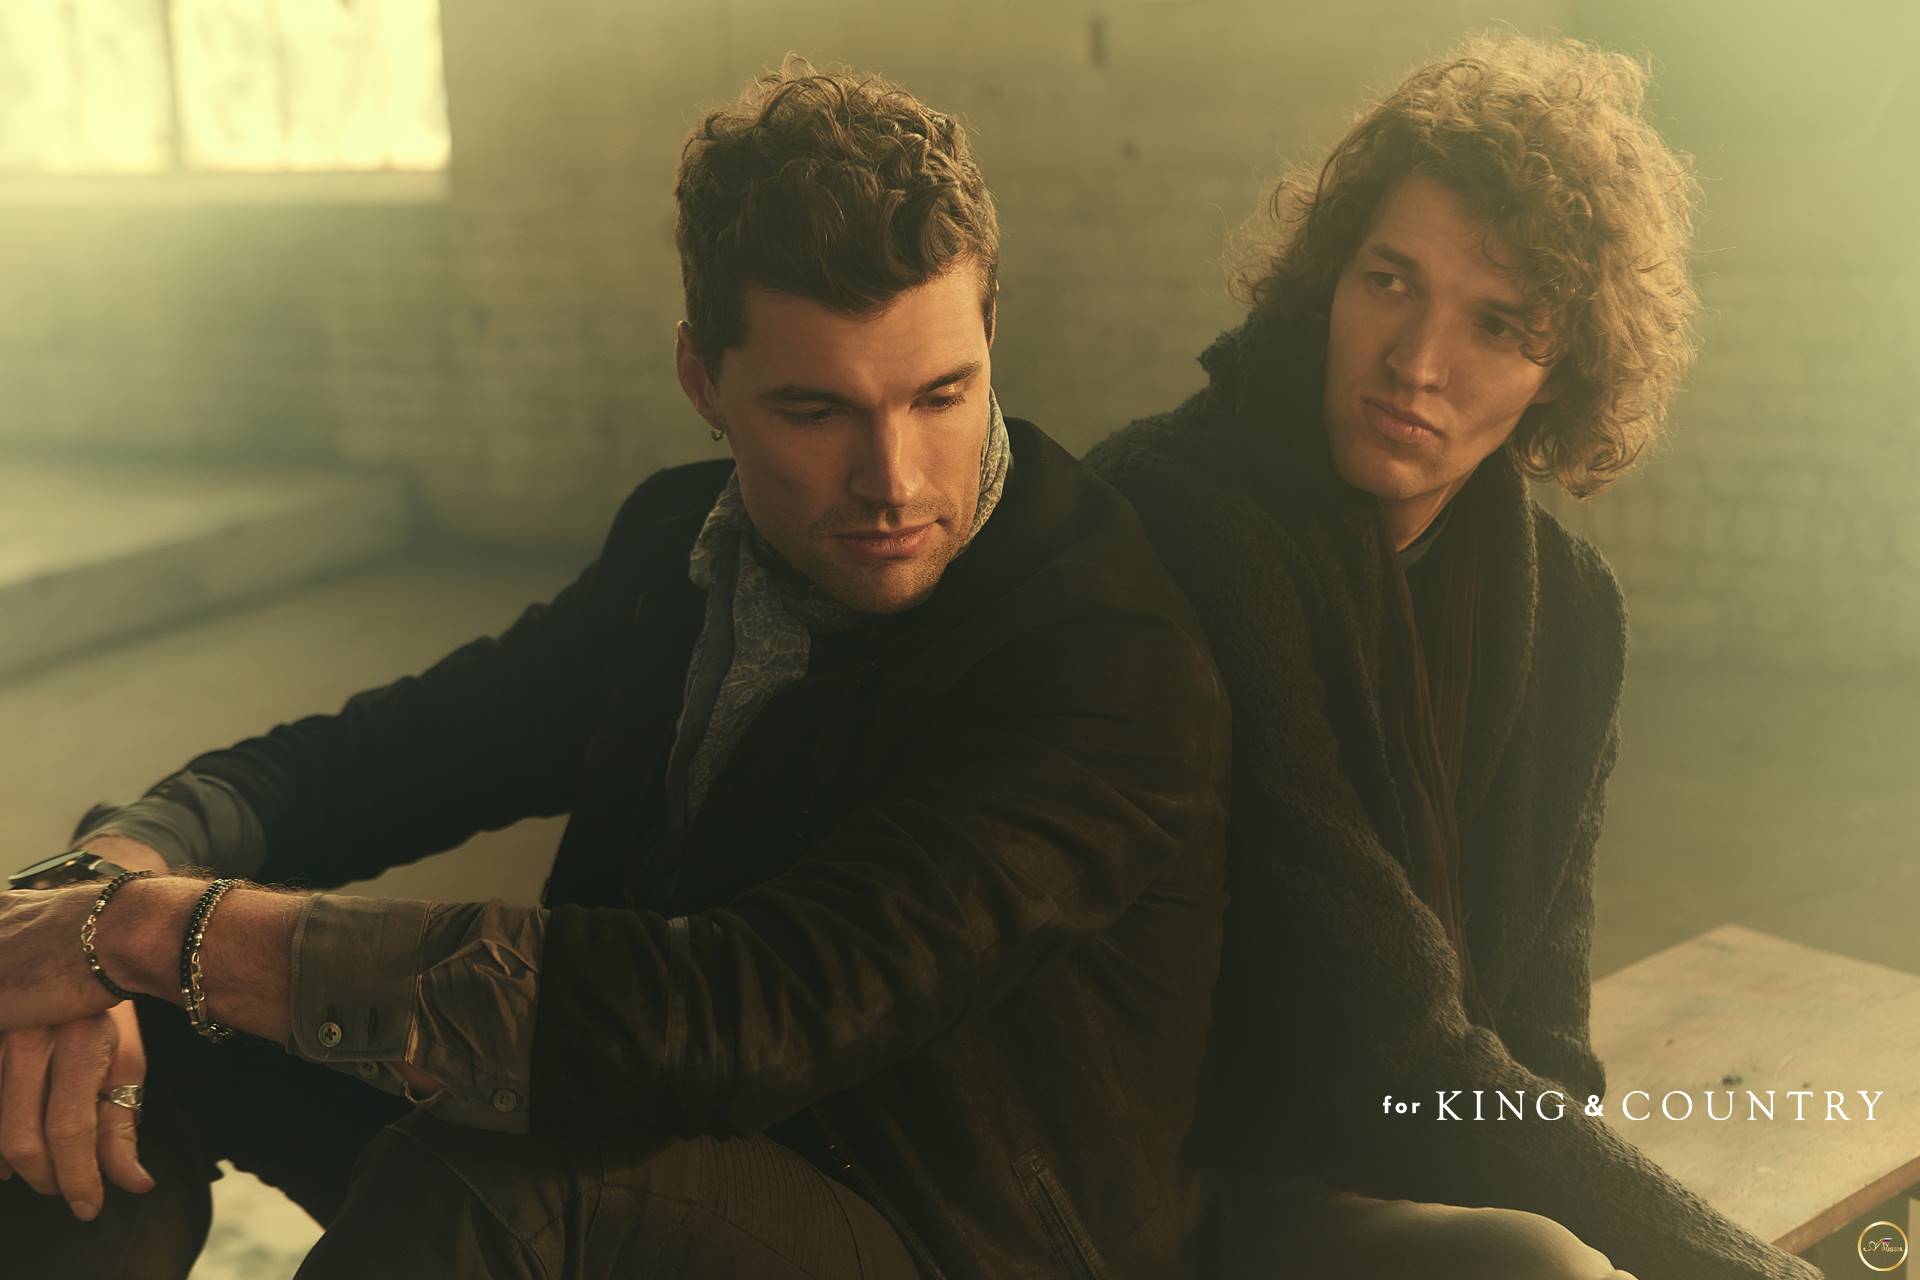 Keep Calm And Love For King and Country by MsMaggie on DeviantArt